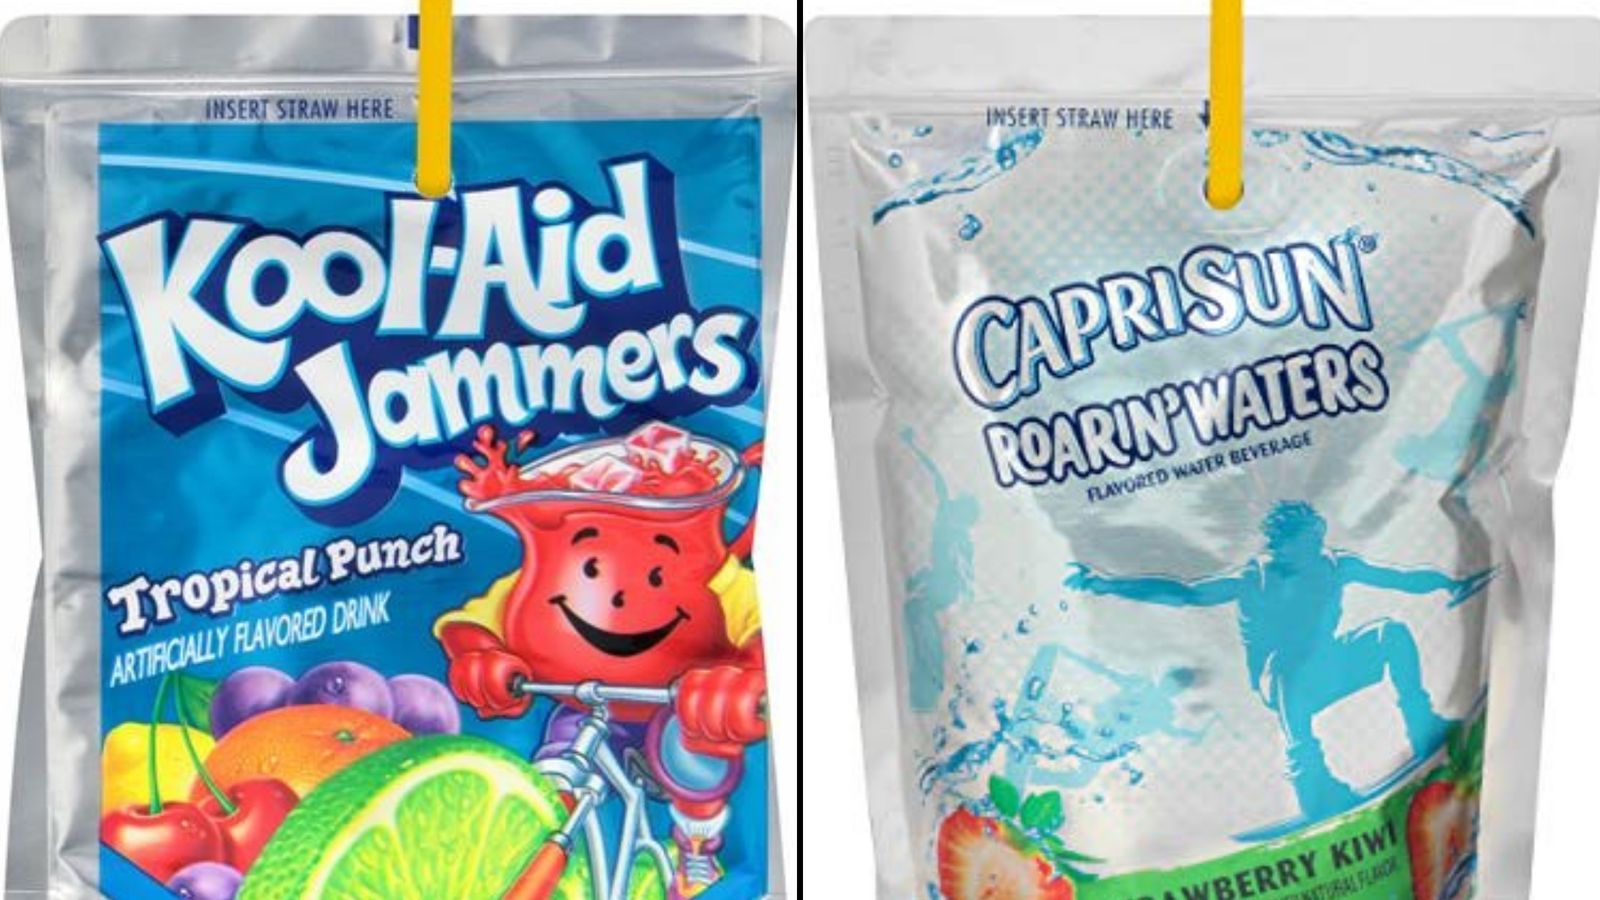 Kool Aid Jammers Strawberry Kiwi Kids Drink 0% Juice Box Pouches, 10 ct -  Pay Less Super Markets